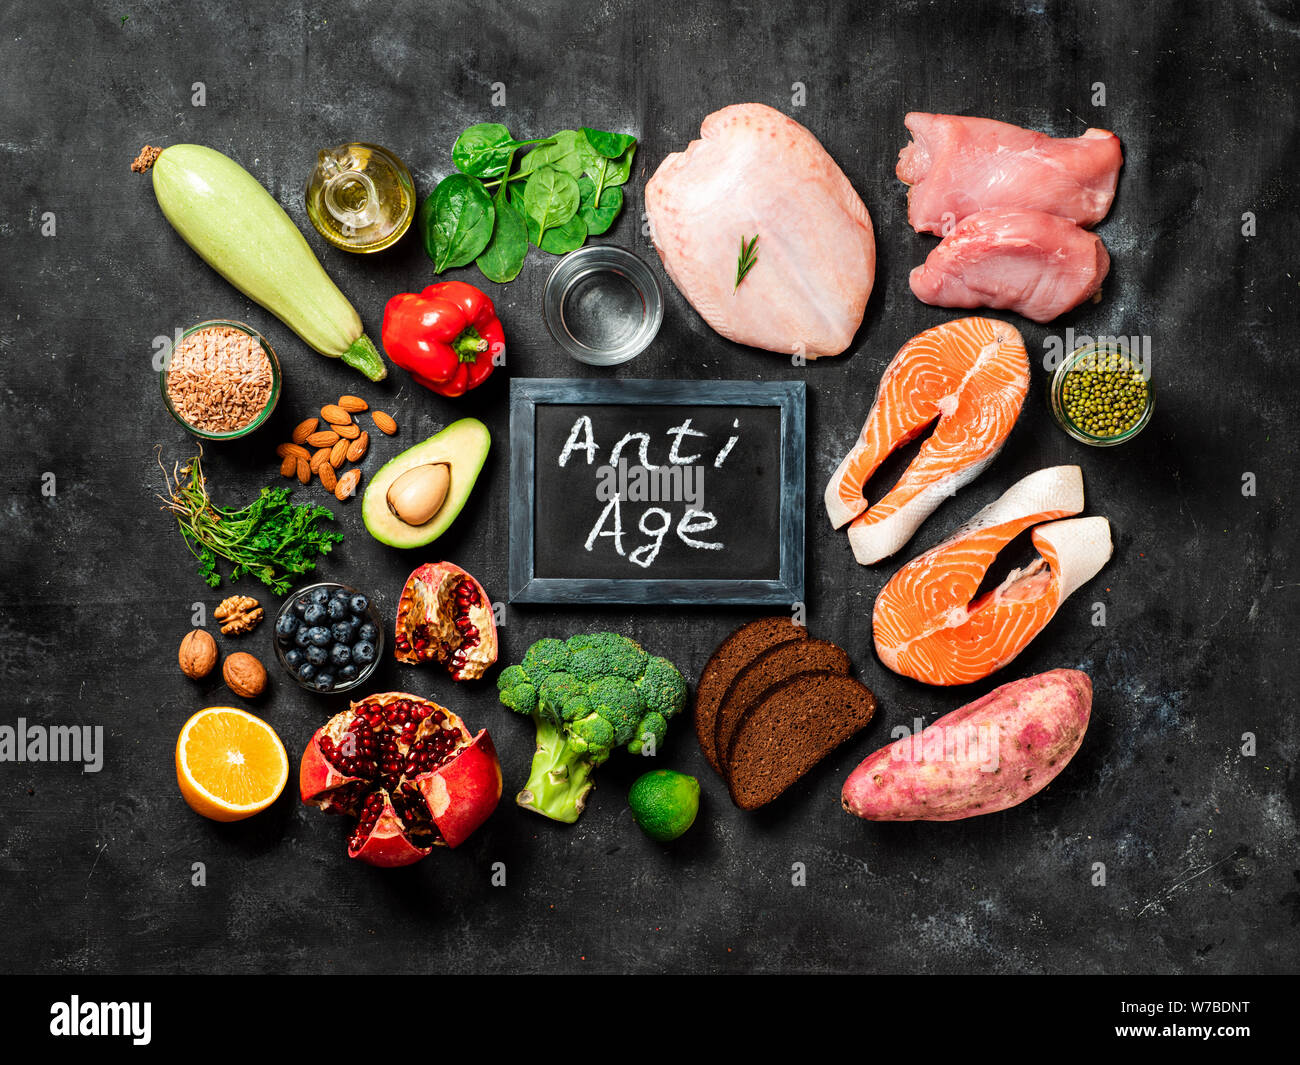 Anti Age menu concept. Different food ingredients and chalkboard with Anti Age words on dark background. Top view or flat lay. Stock Photo